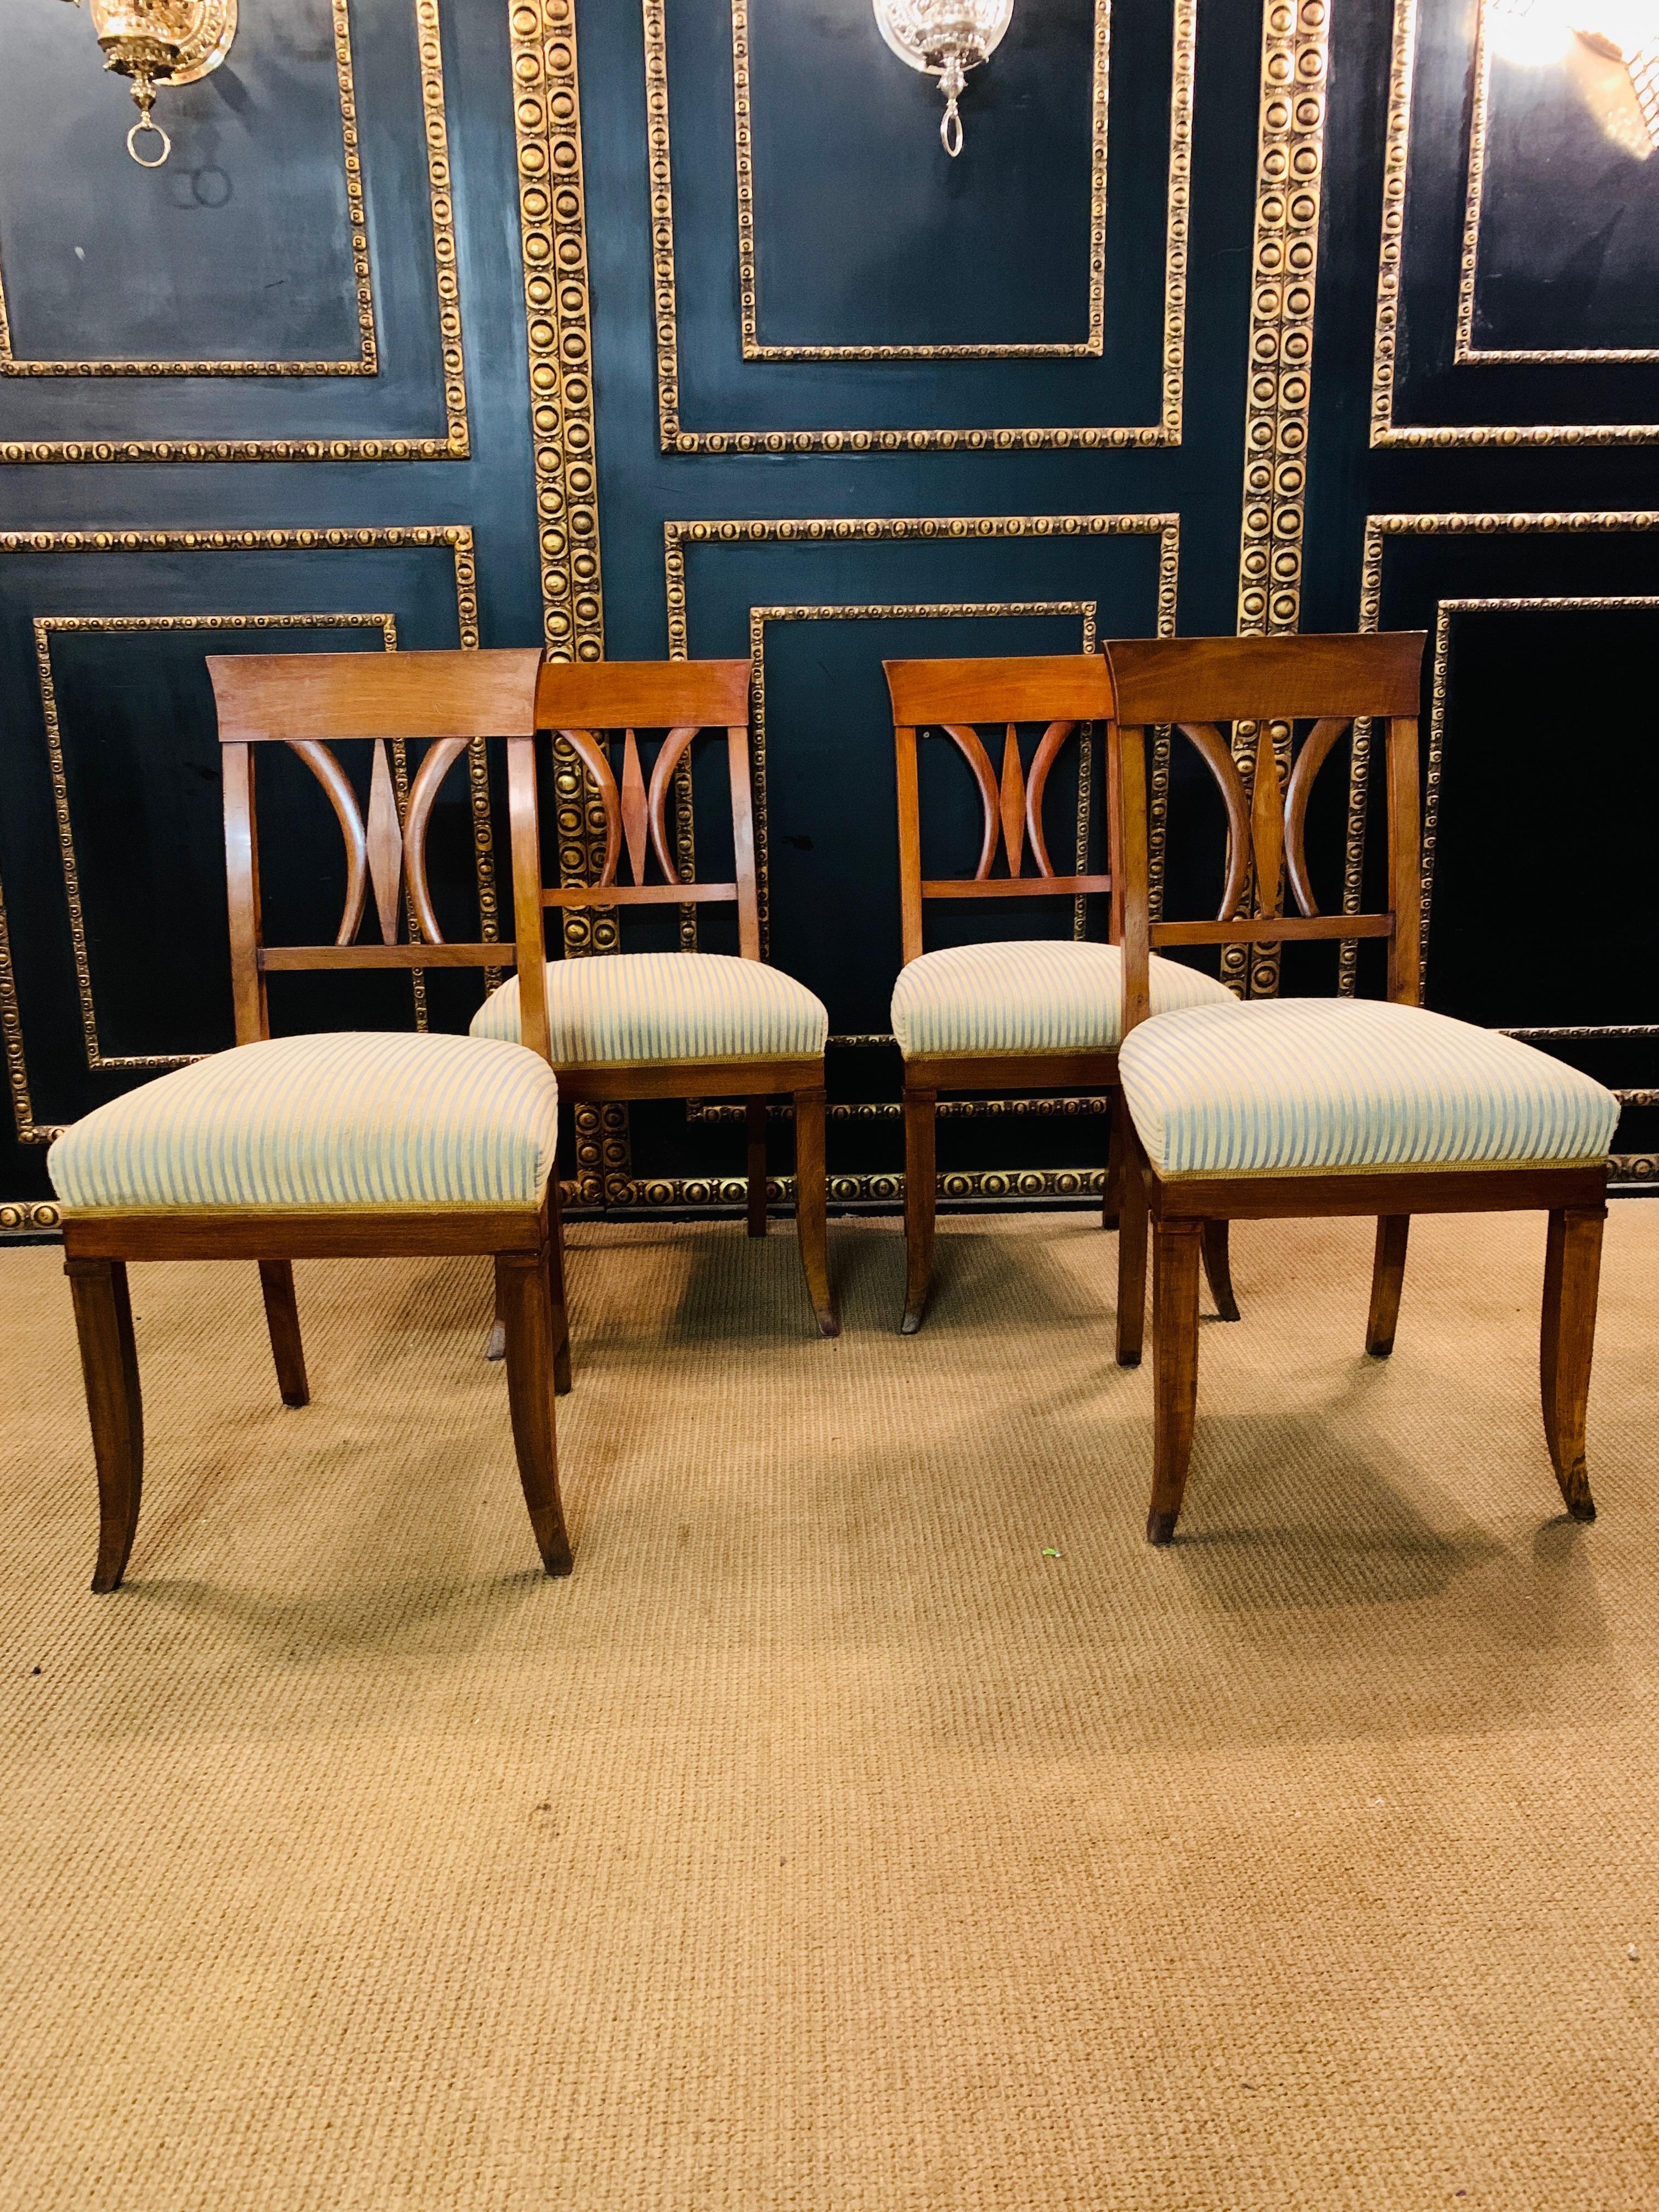 Beautiful set of Biedermeier chairs, circa 1820. Solid cheerywood. Slightly arched backrest with straight top and middle bridge. upholstered seat and covered with a fabric. These chairs have been completely restored by an experienced restorer not so